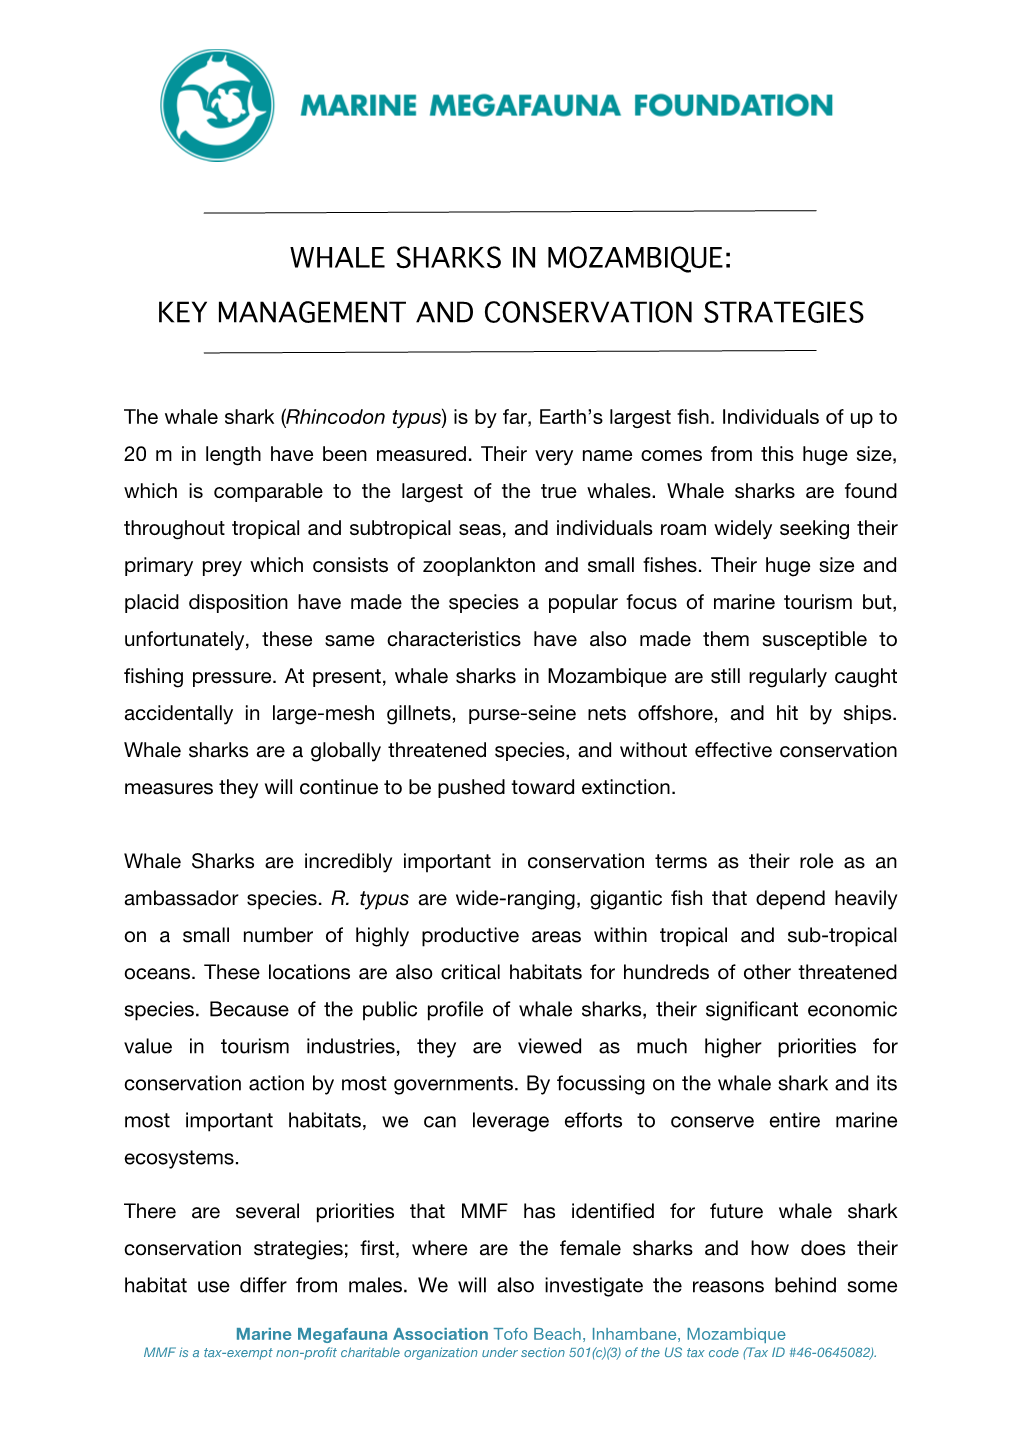 Whale Sharks in Mozambique: Key Management and Conservation